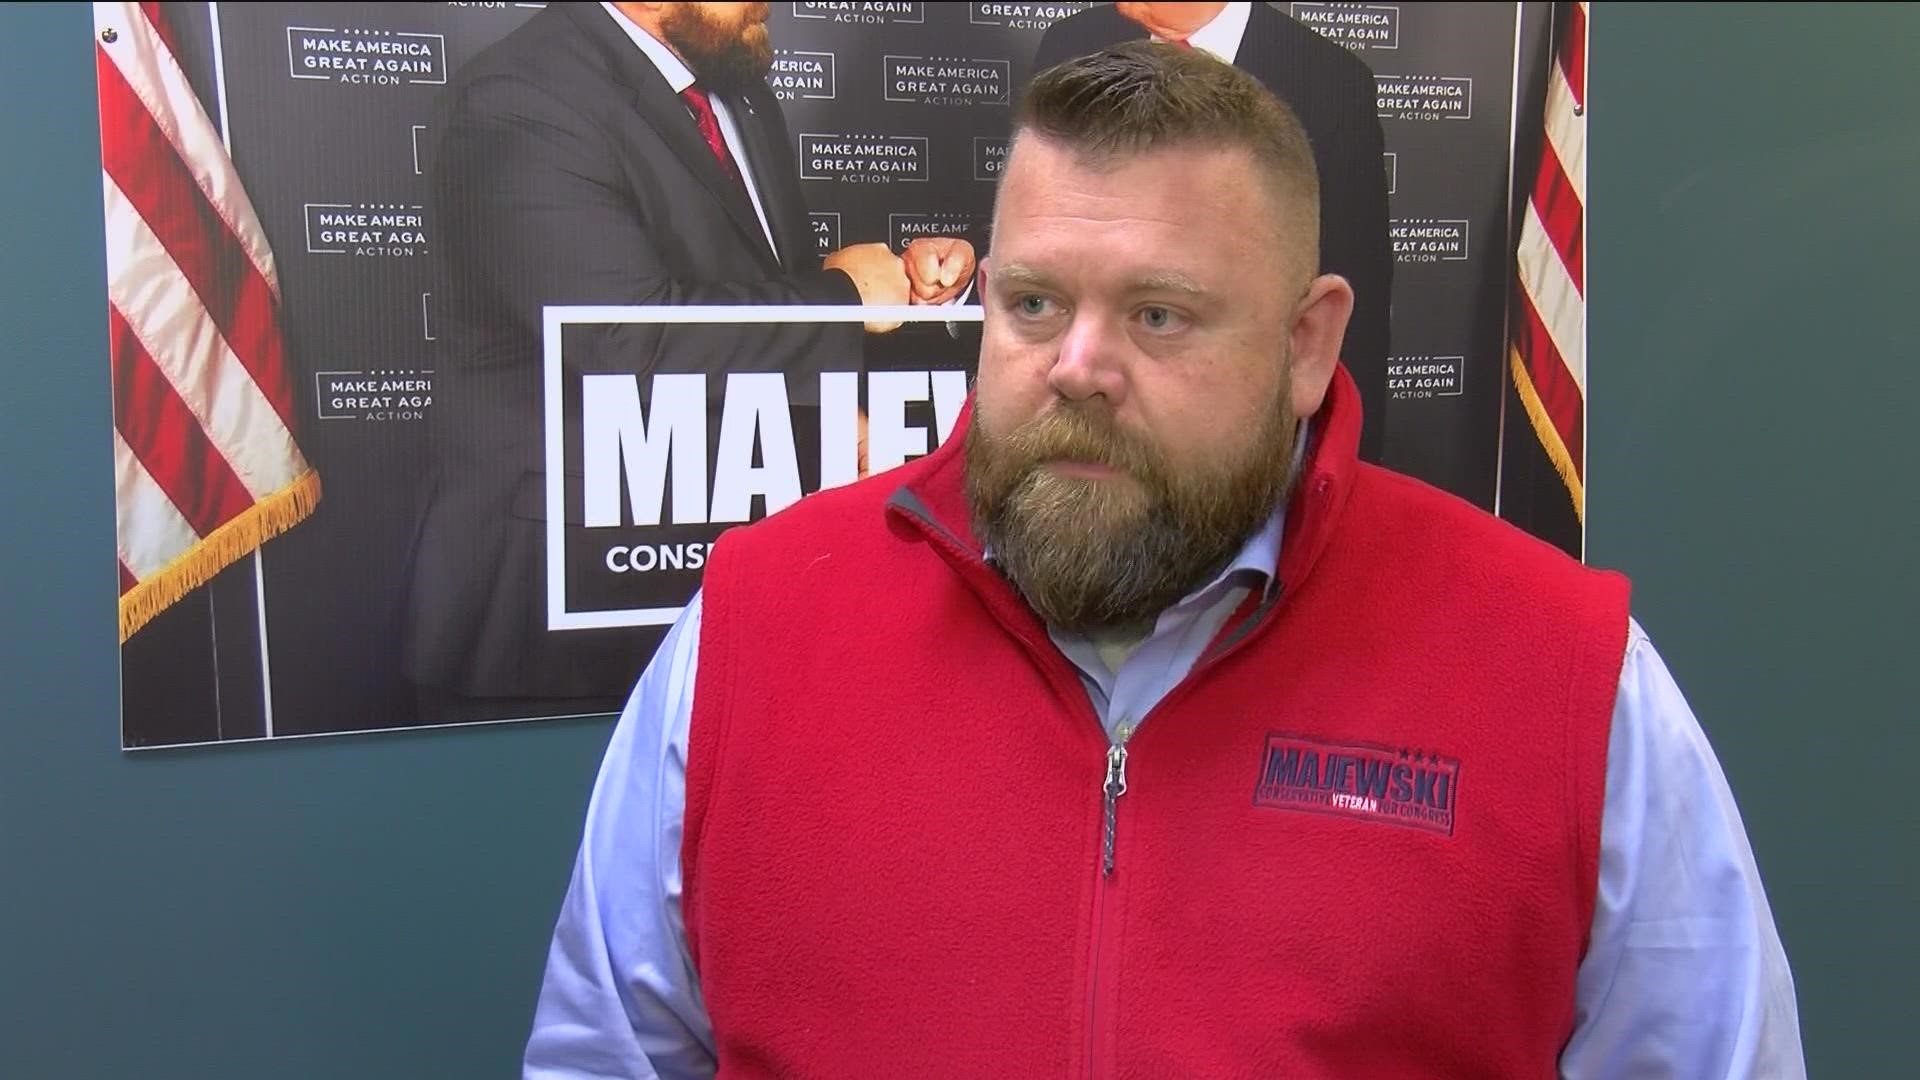 "I'm highly appreciative he sees our campaign as on that's going to win," says J.R. Majewski